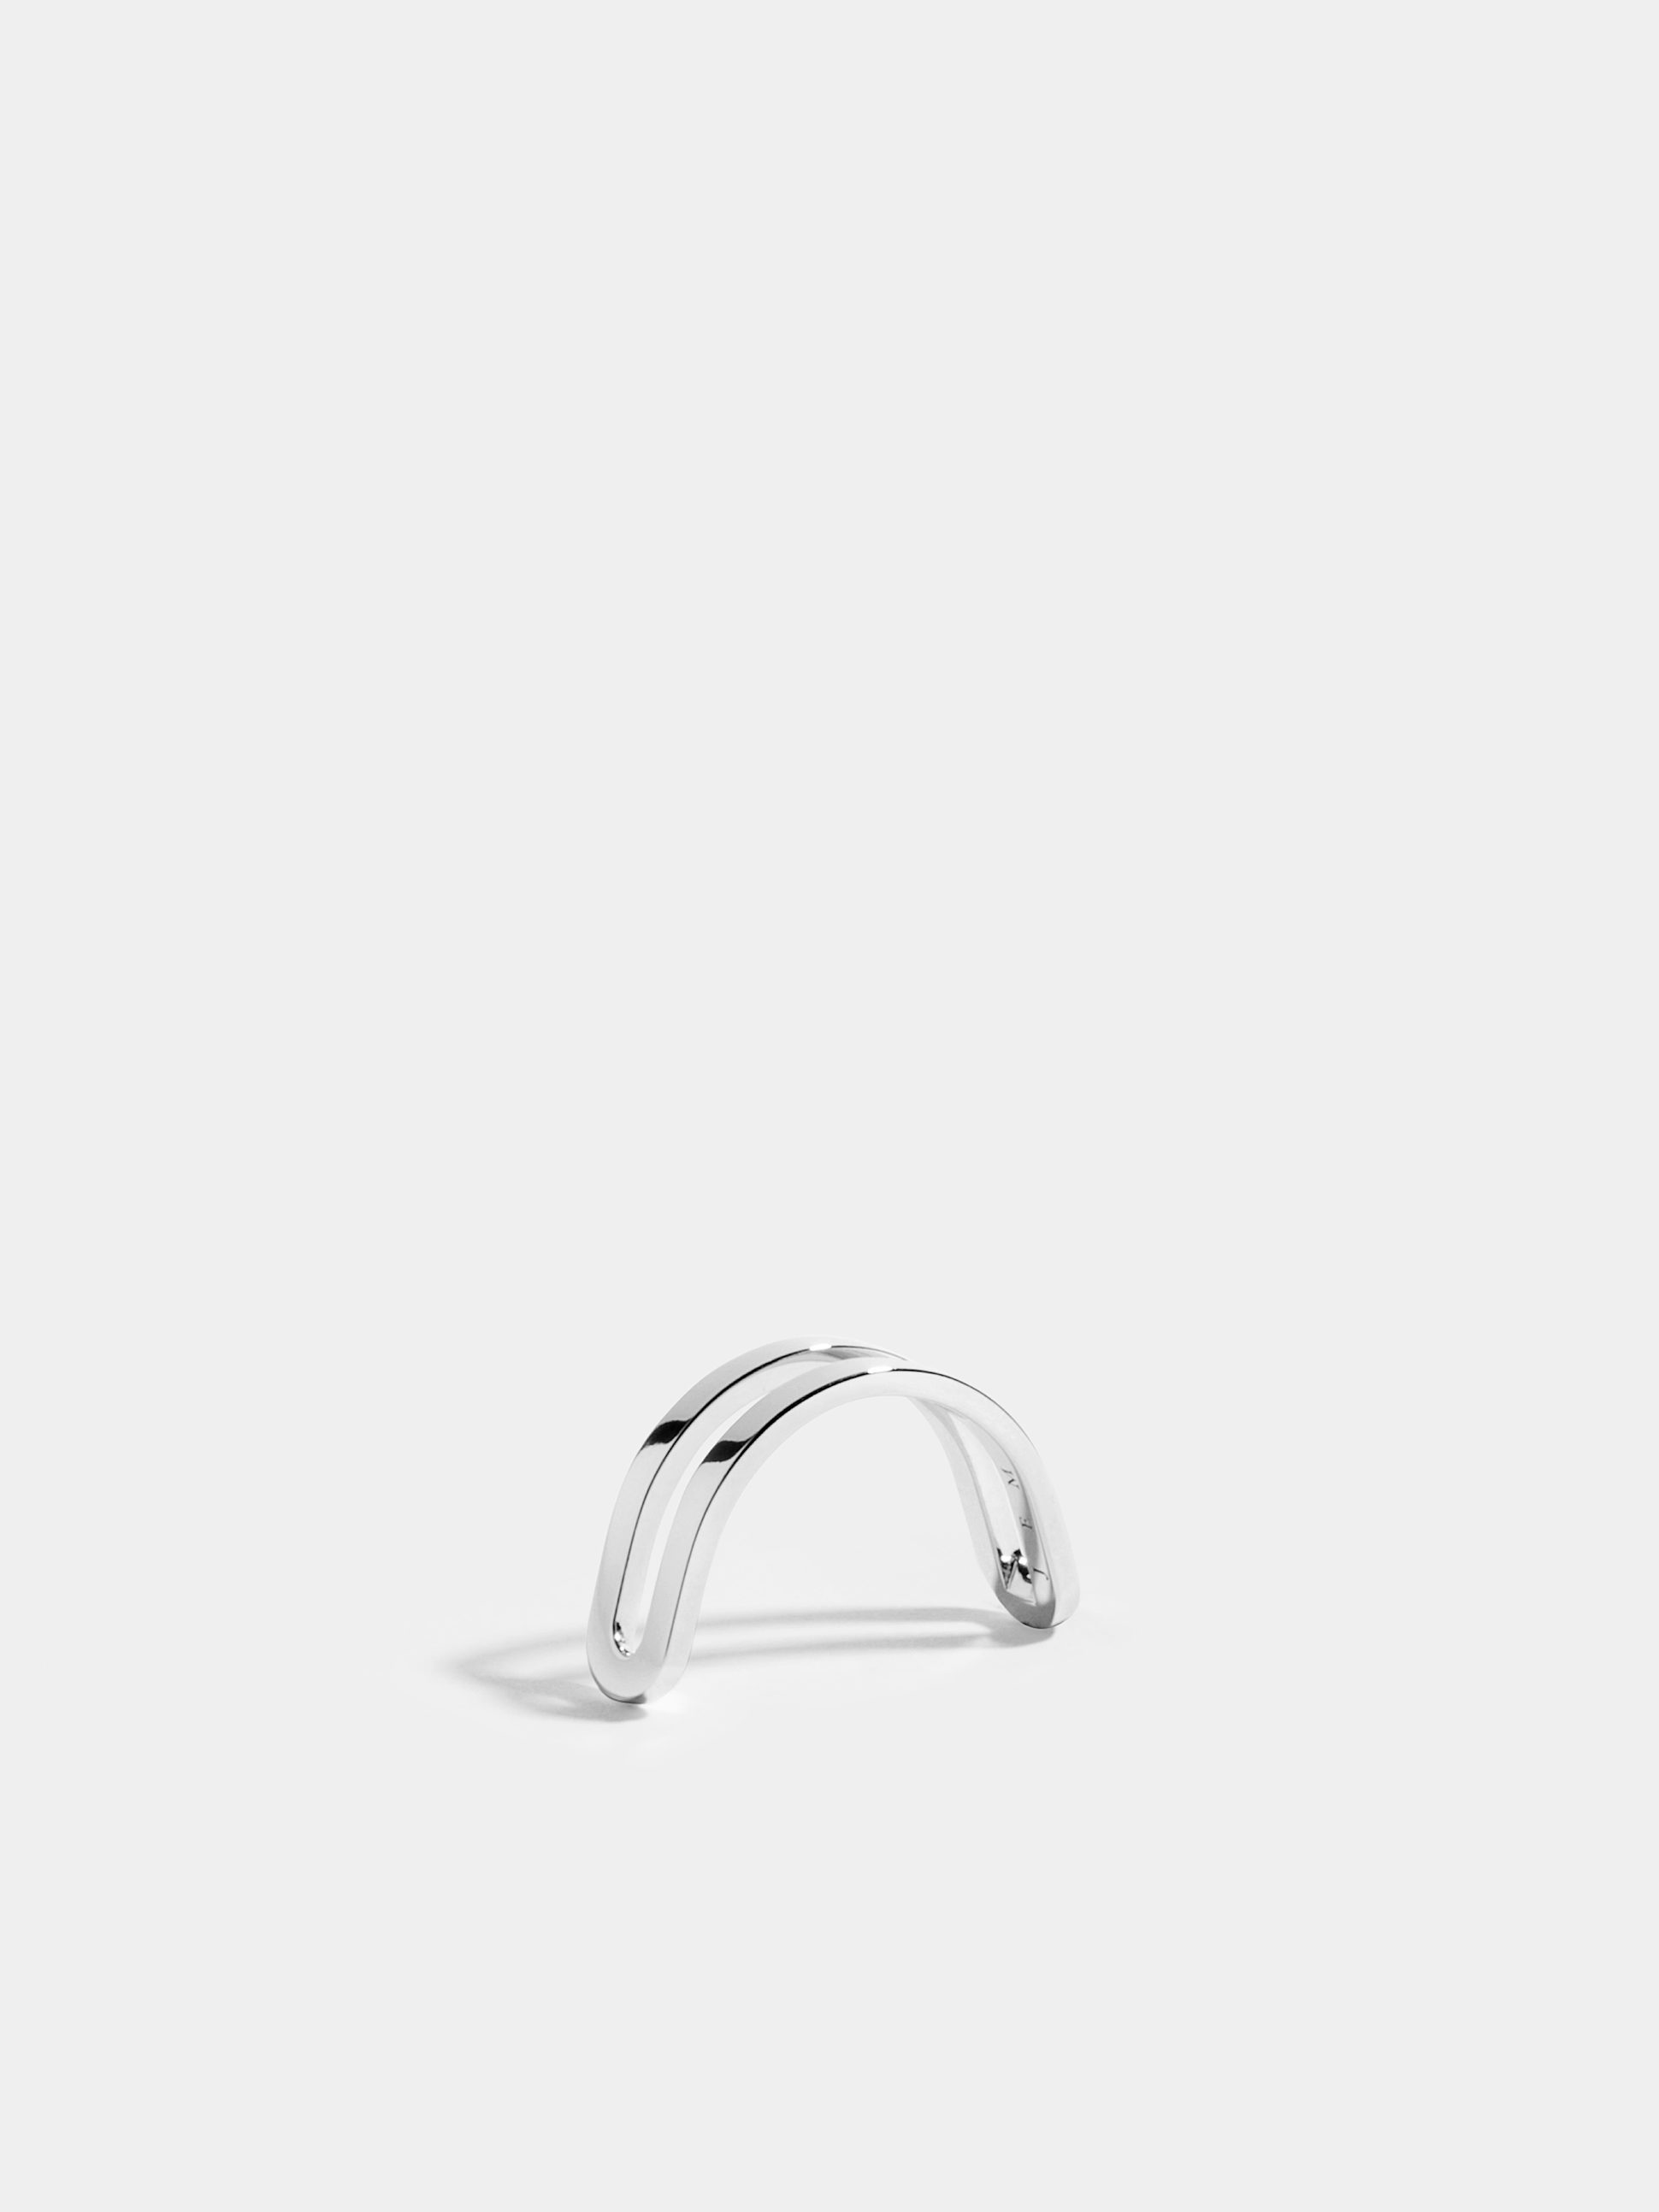 Étreintes simple half-ring in 18k Fairmined ethical white gold with a polished finish.